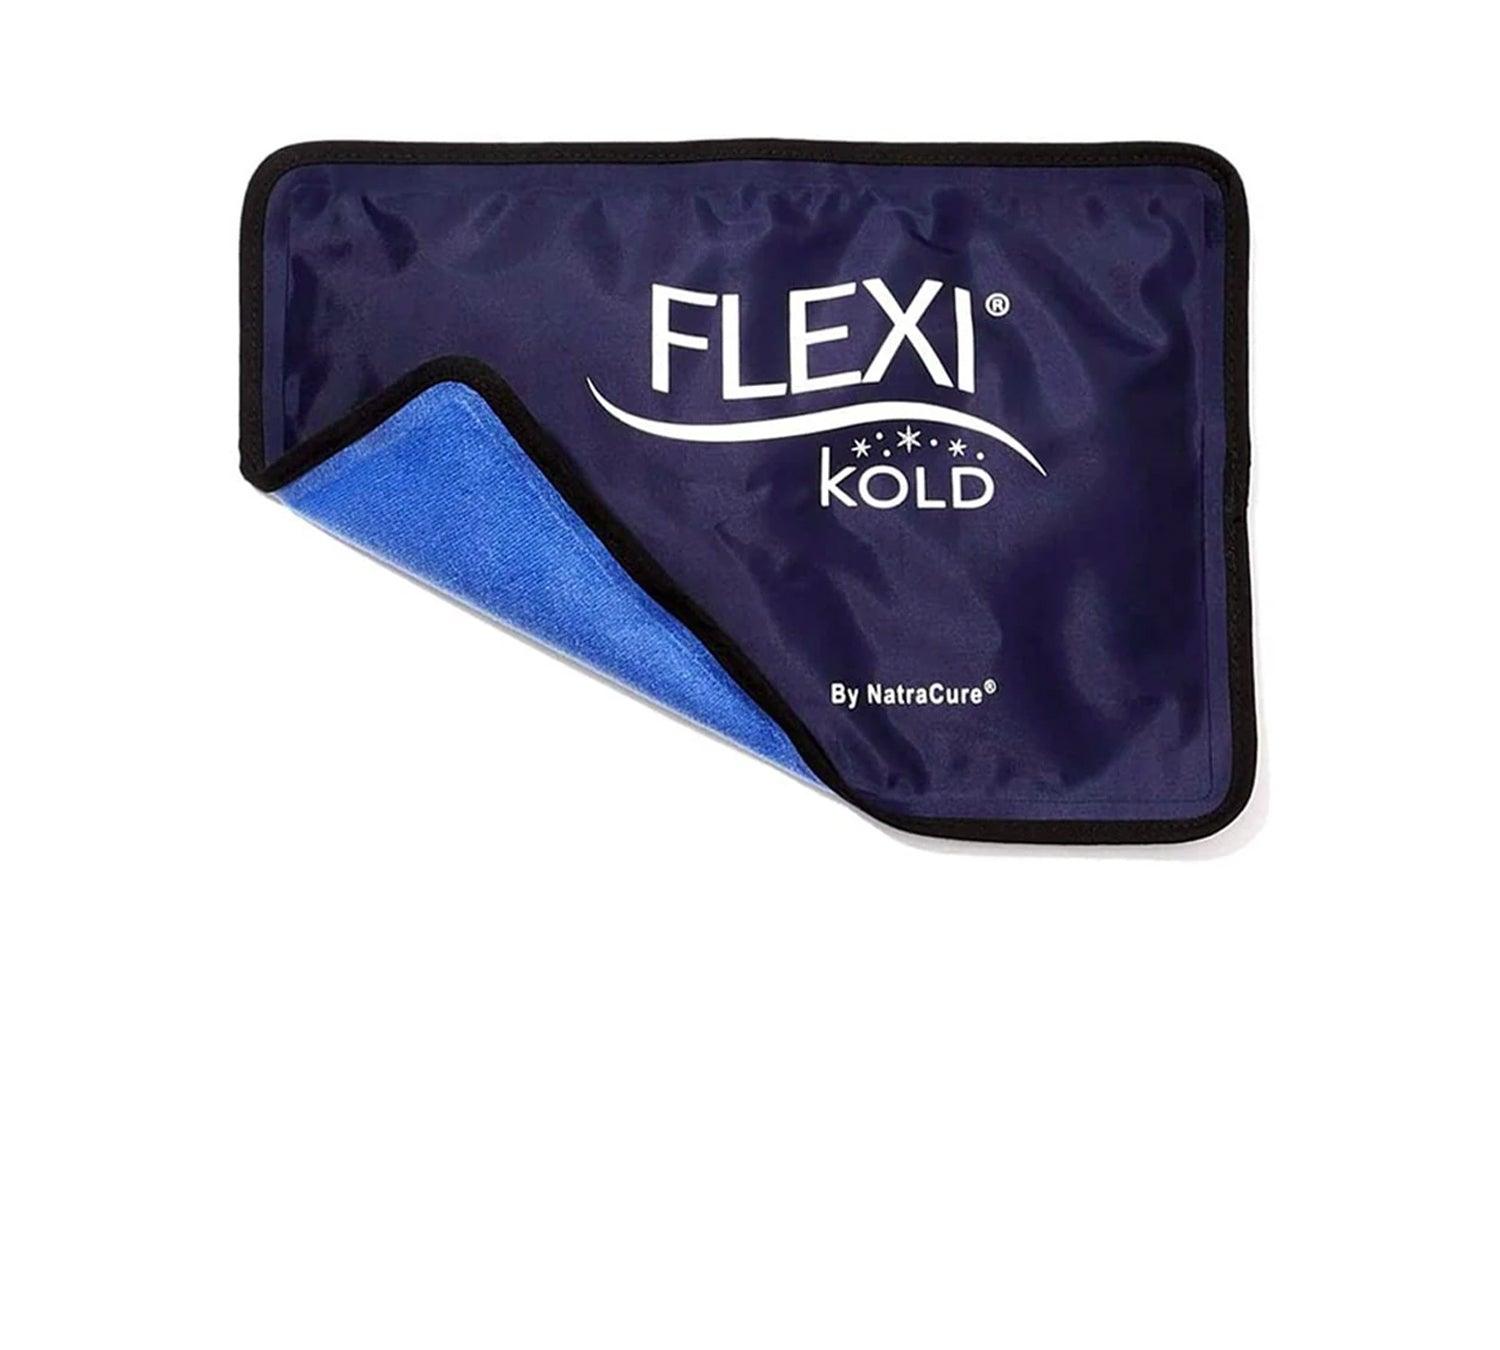  Reusable Hot and Cold Gel Ice Packs for Injuries, Cold Compress,  Gel Ice Packs, 10.5 in Long x 5 in Wide